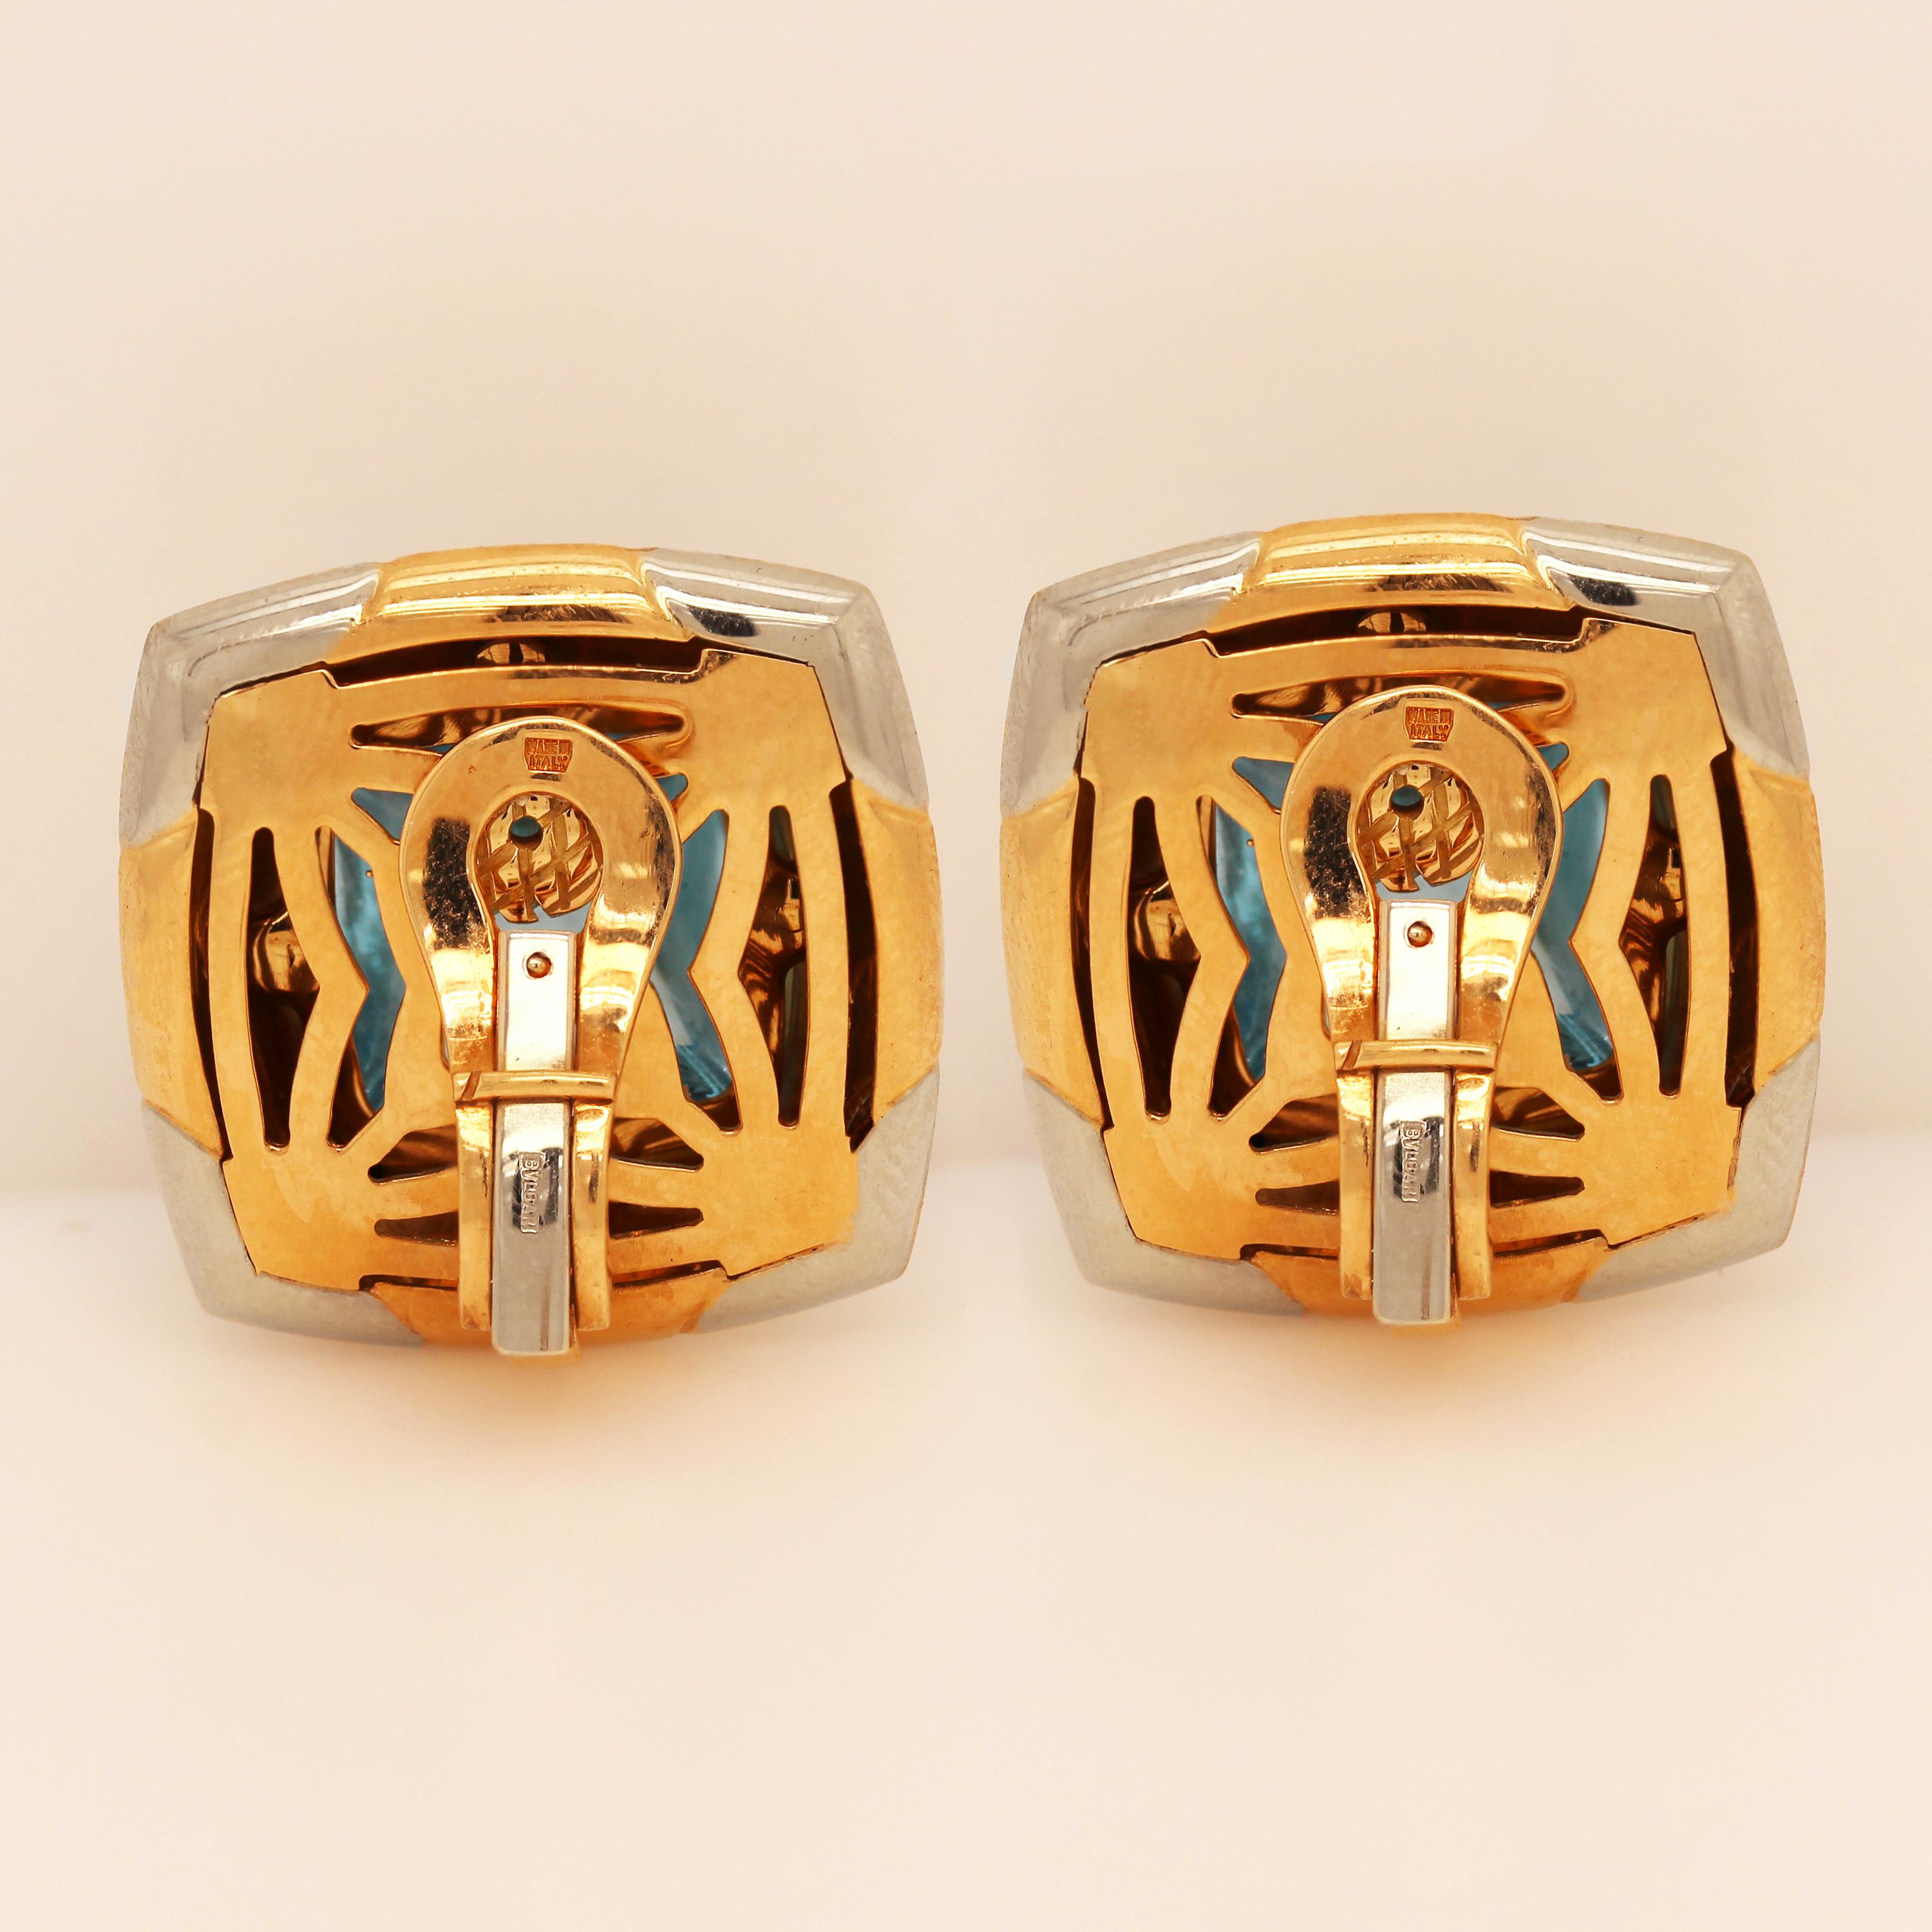 Bvlgari Roma Pyramid 18K Two Tone Gold Sugarloaf Cabochon Blue Topaz Clip On Earrings

Produced in Italy by the jewelry house of Bvlgari circa late 1990's. These earrings are from the Pyramid collection, crafted in solid 18k yellow and white gold